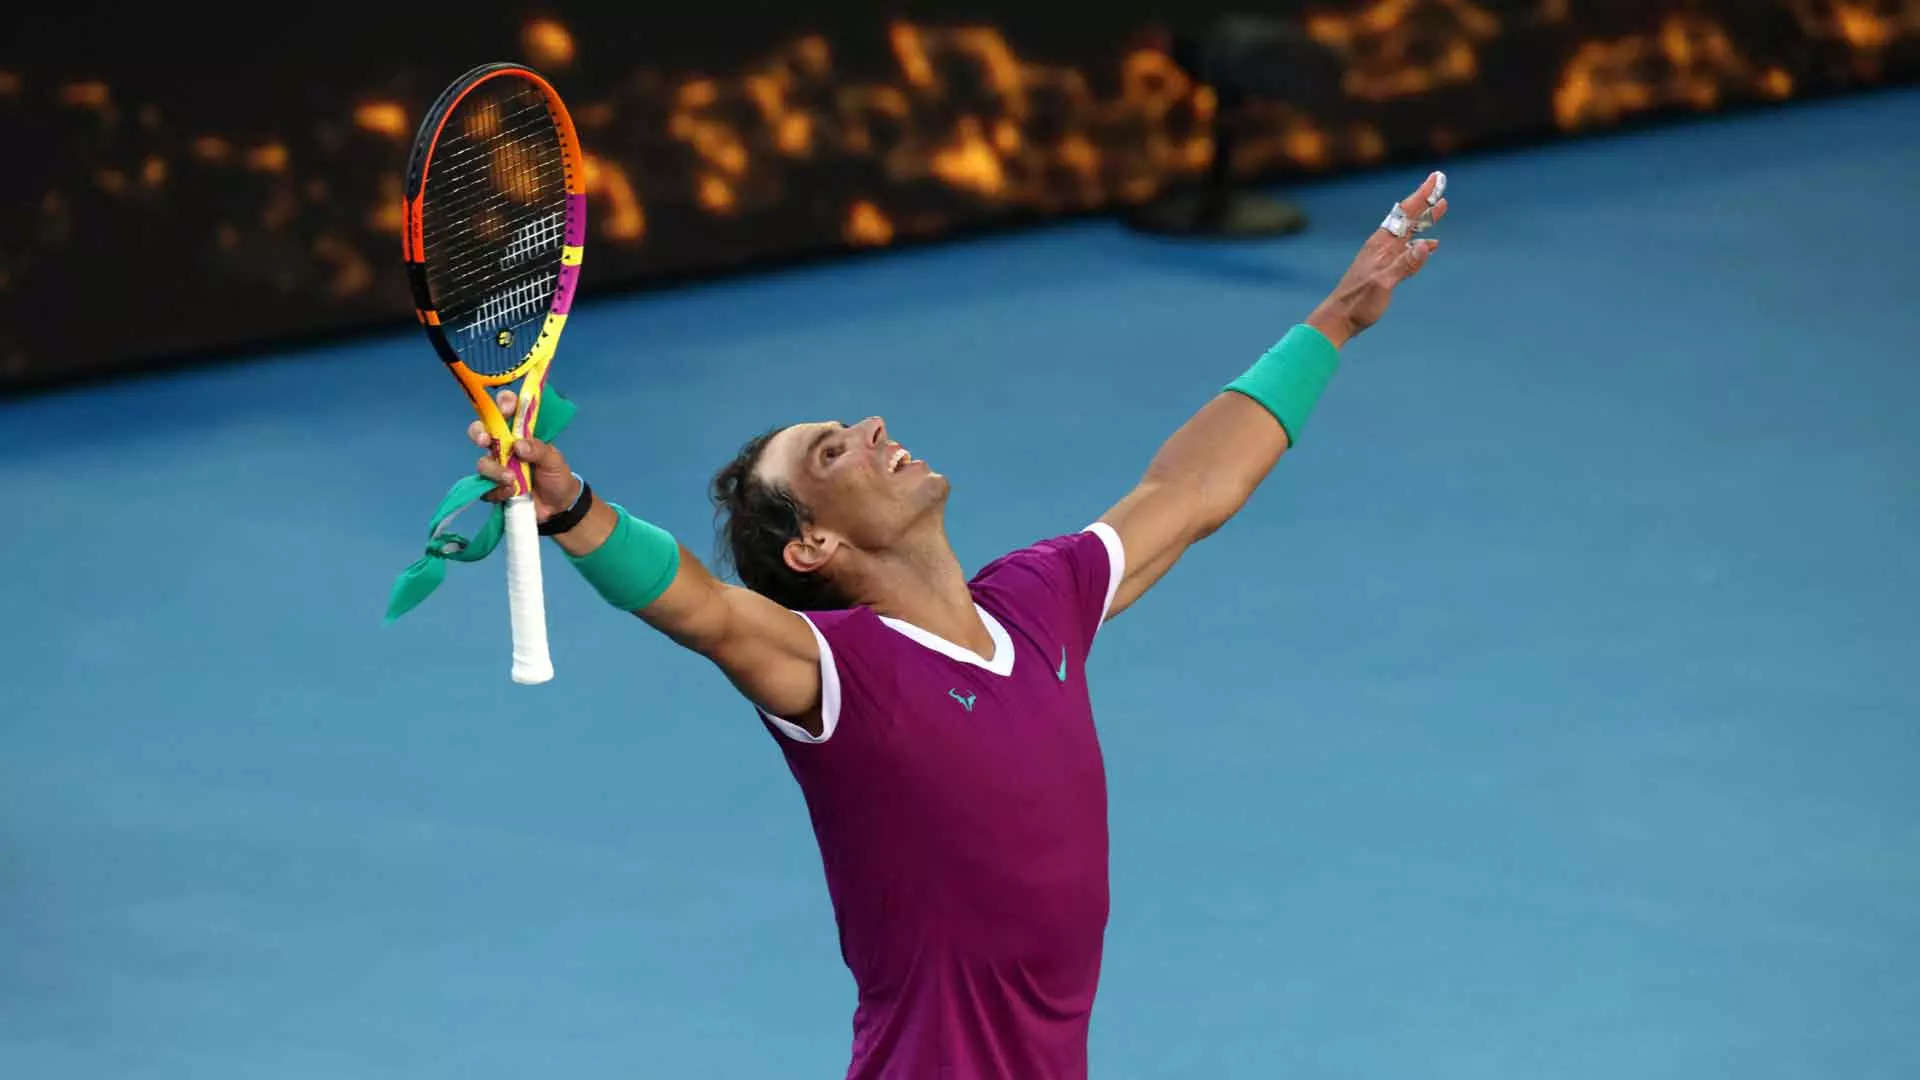 In Pics: Nadal reaches Aus Open semis after a five-set thriller